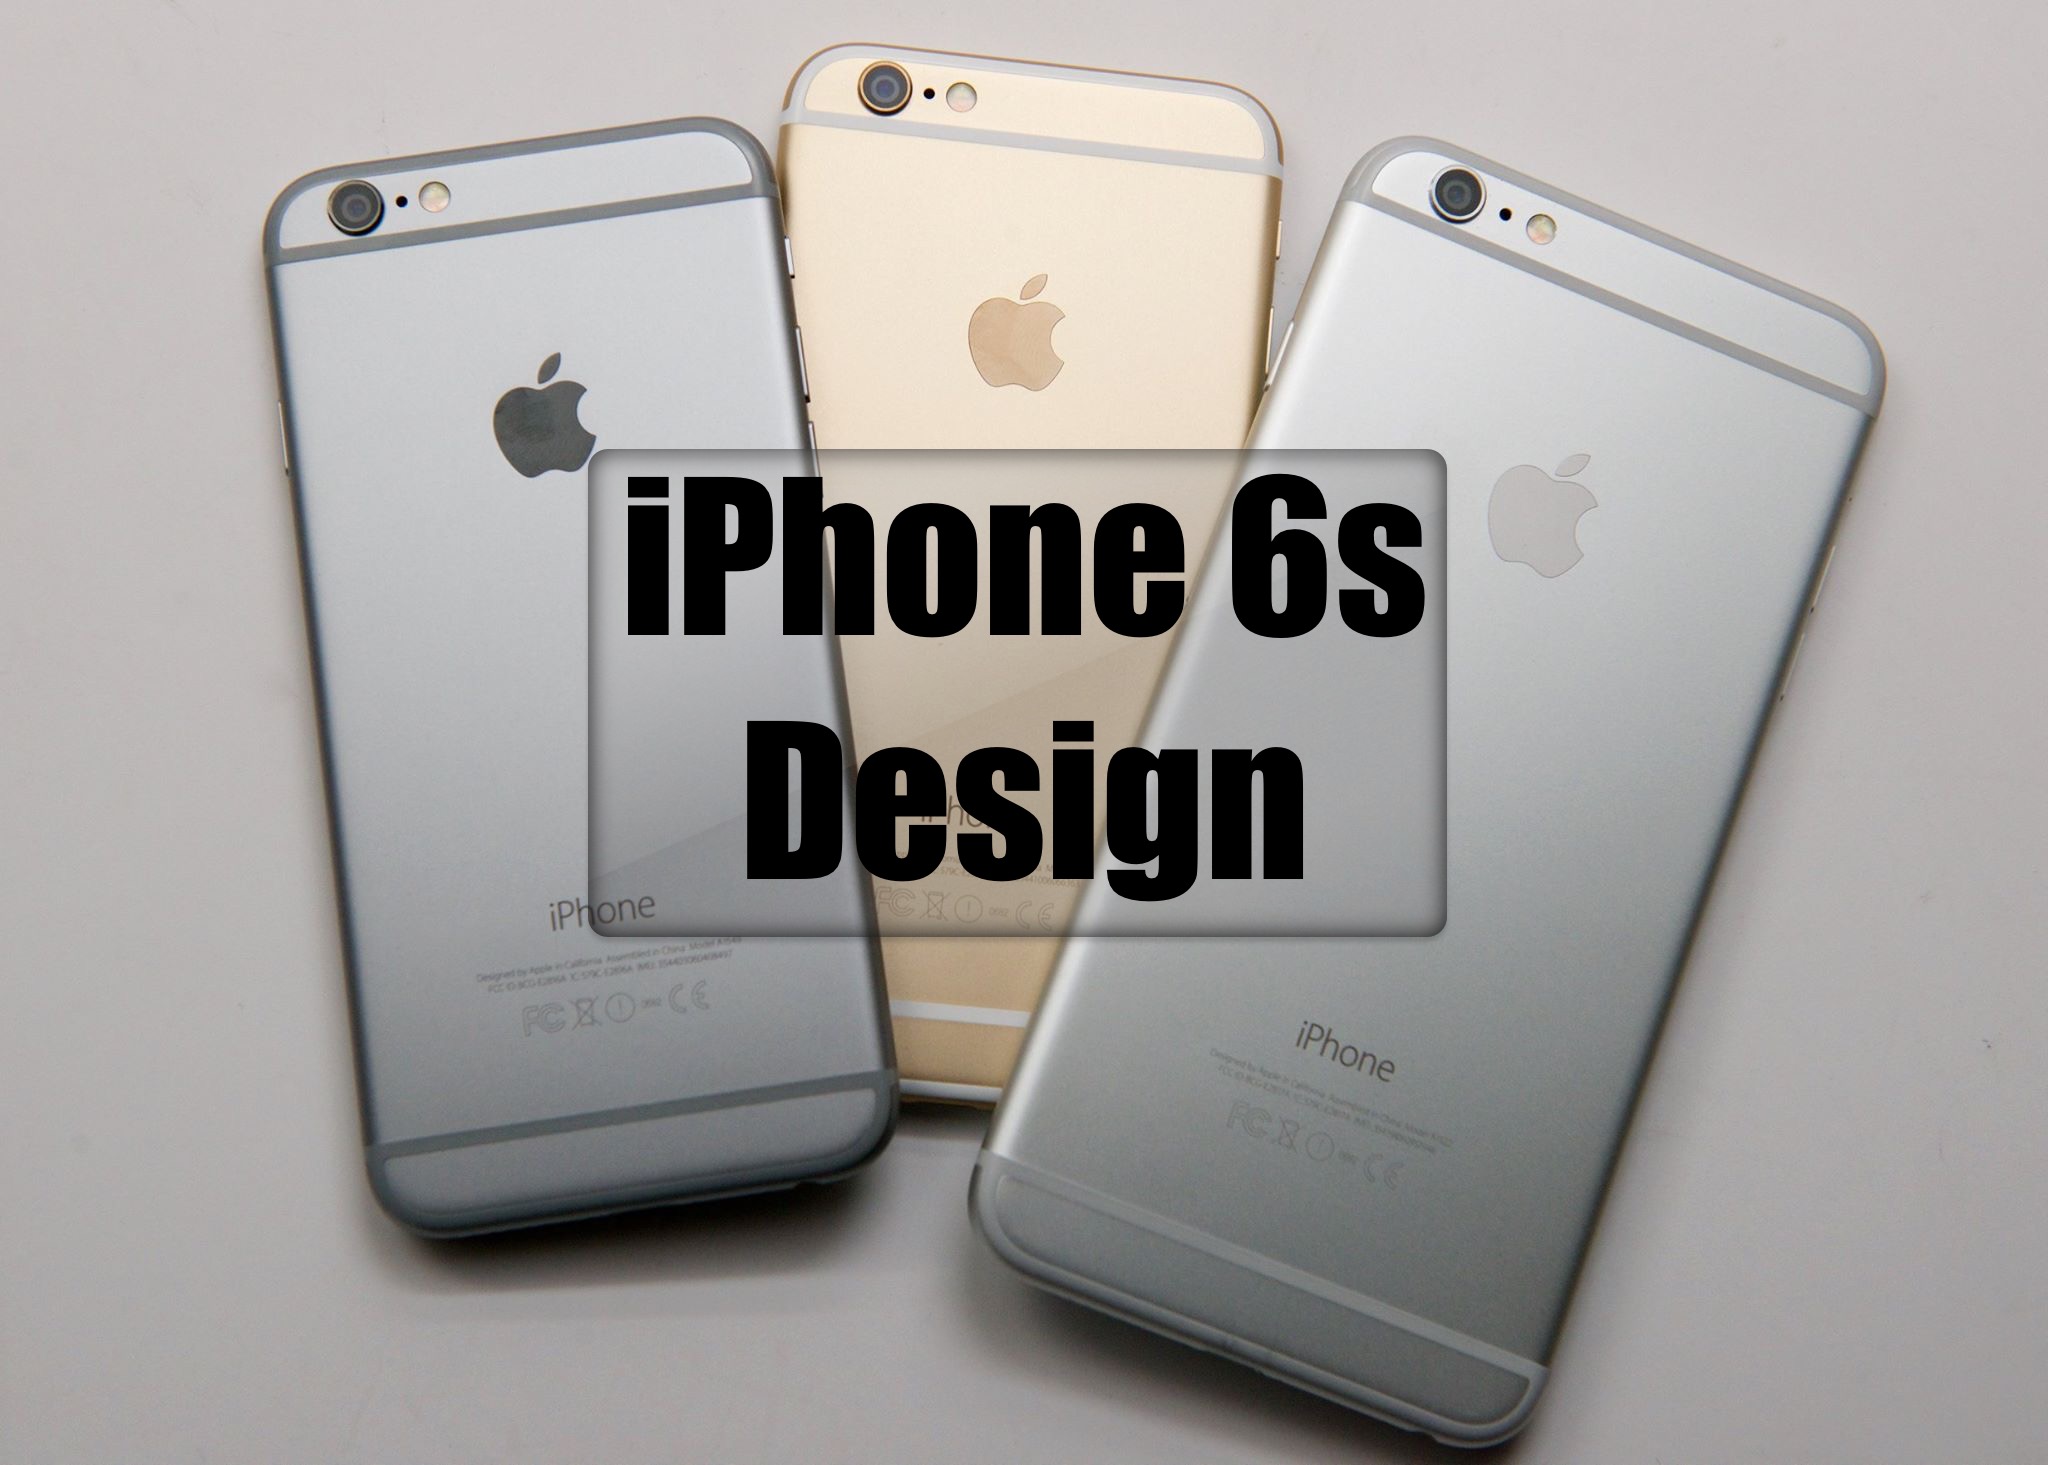 What you need to know about the iPhone 6s design.